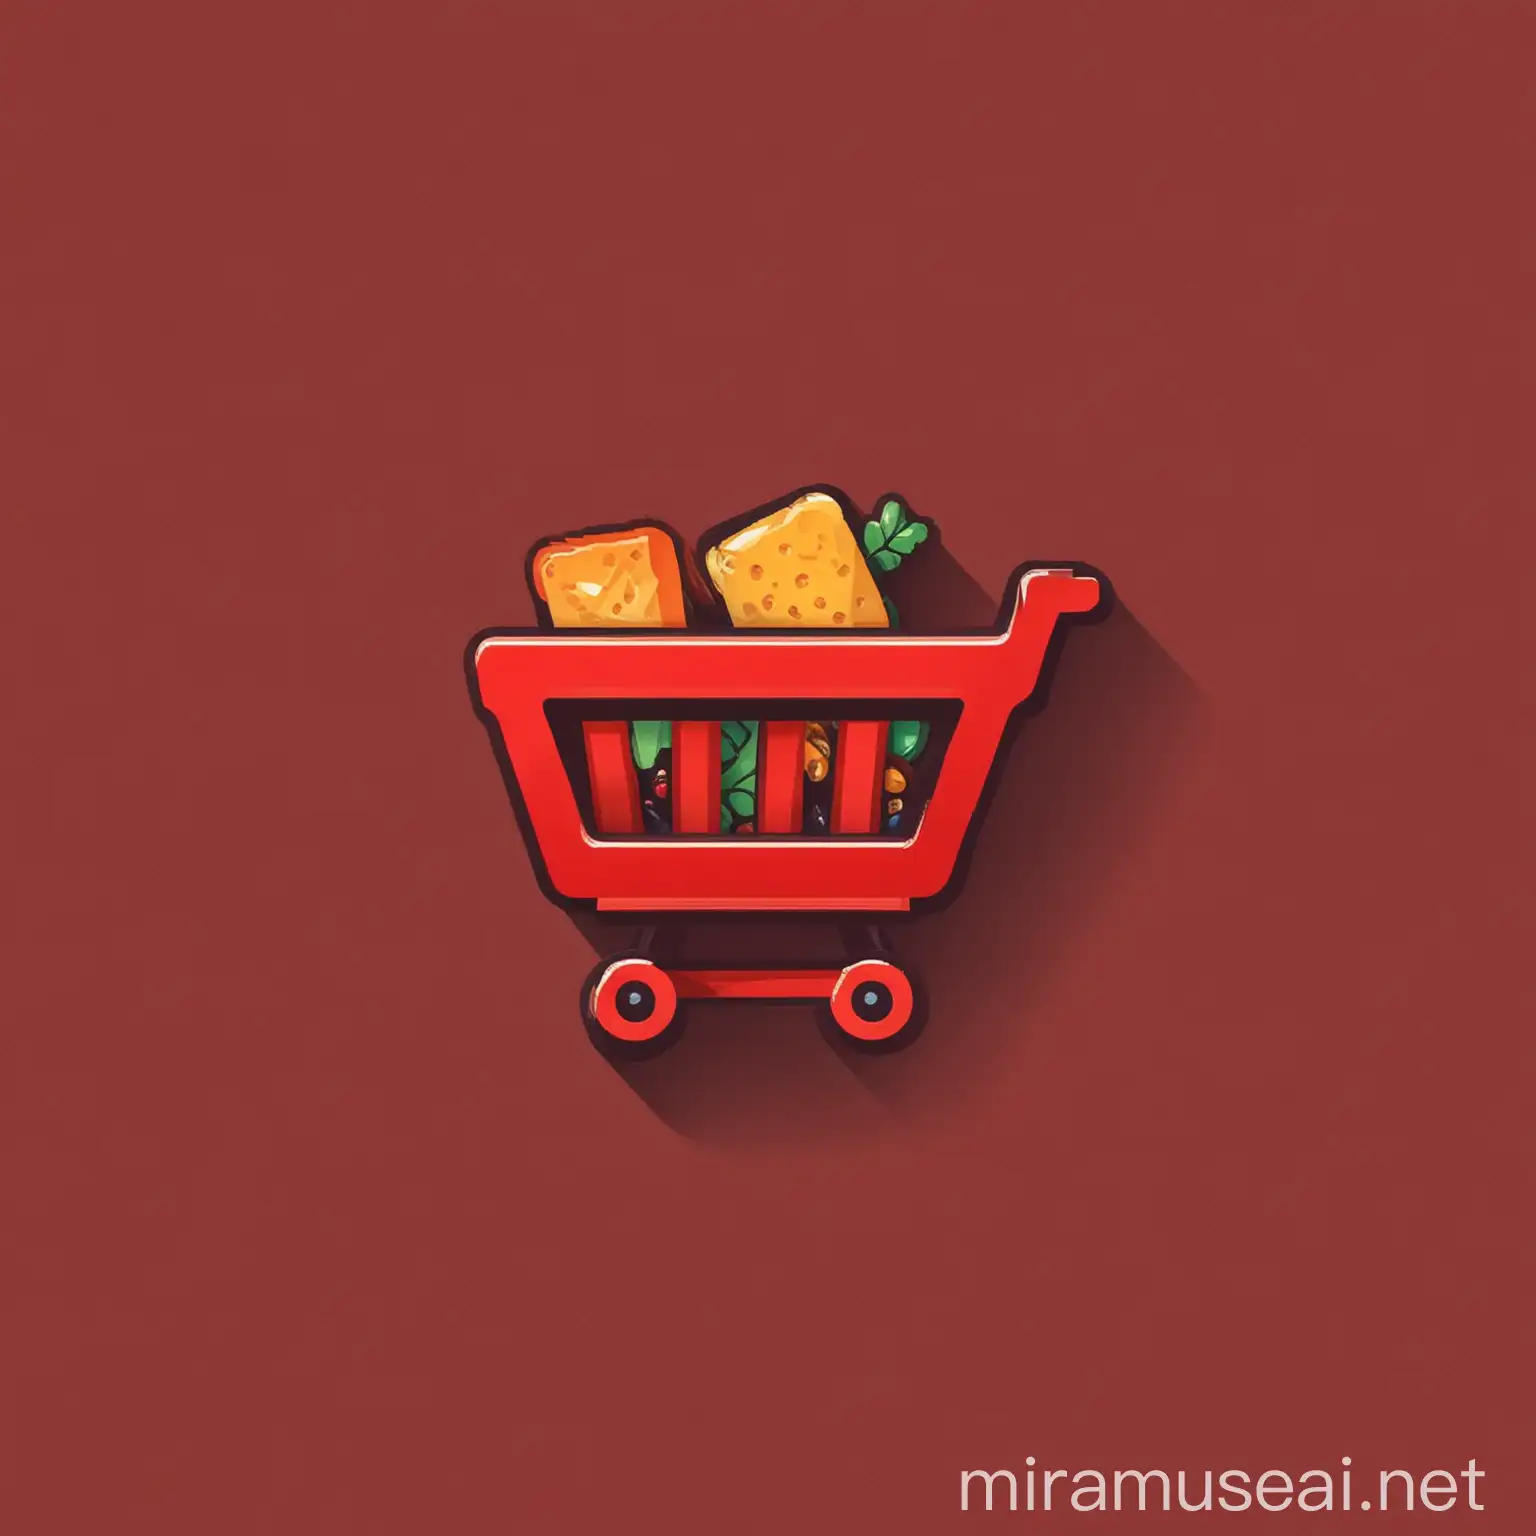 I would like a vector logo for a shopping app. Logo must be composed of a red cart with food inside